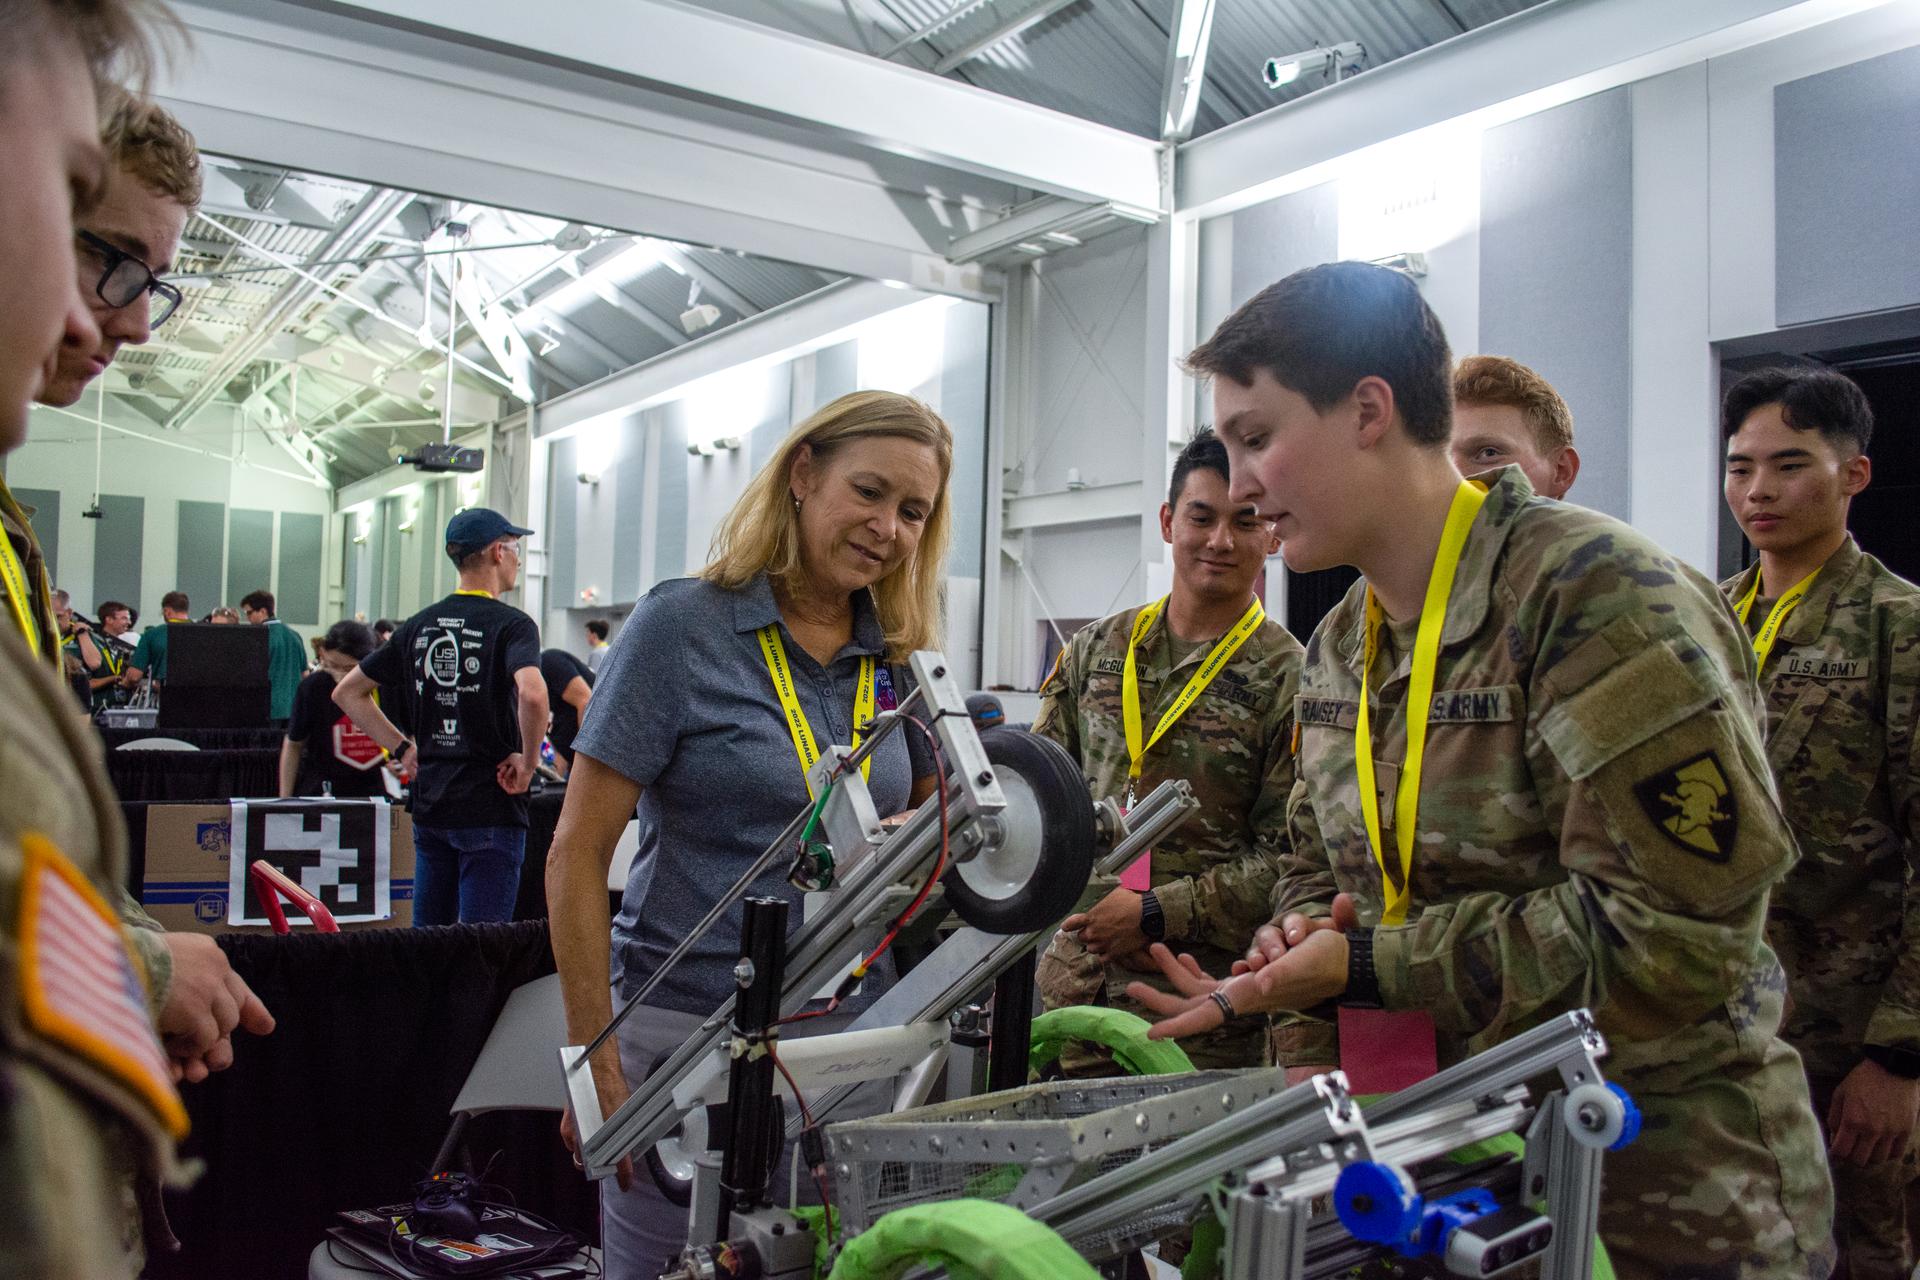 Janet Petro with U.S. Military Academy team at Robotic Mining Competition